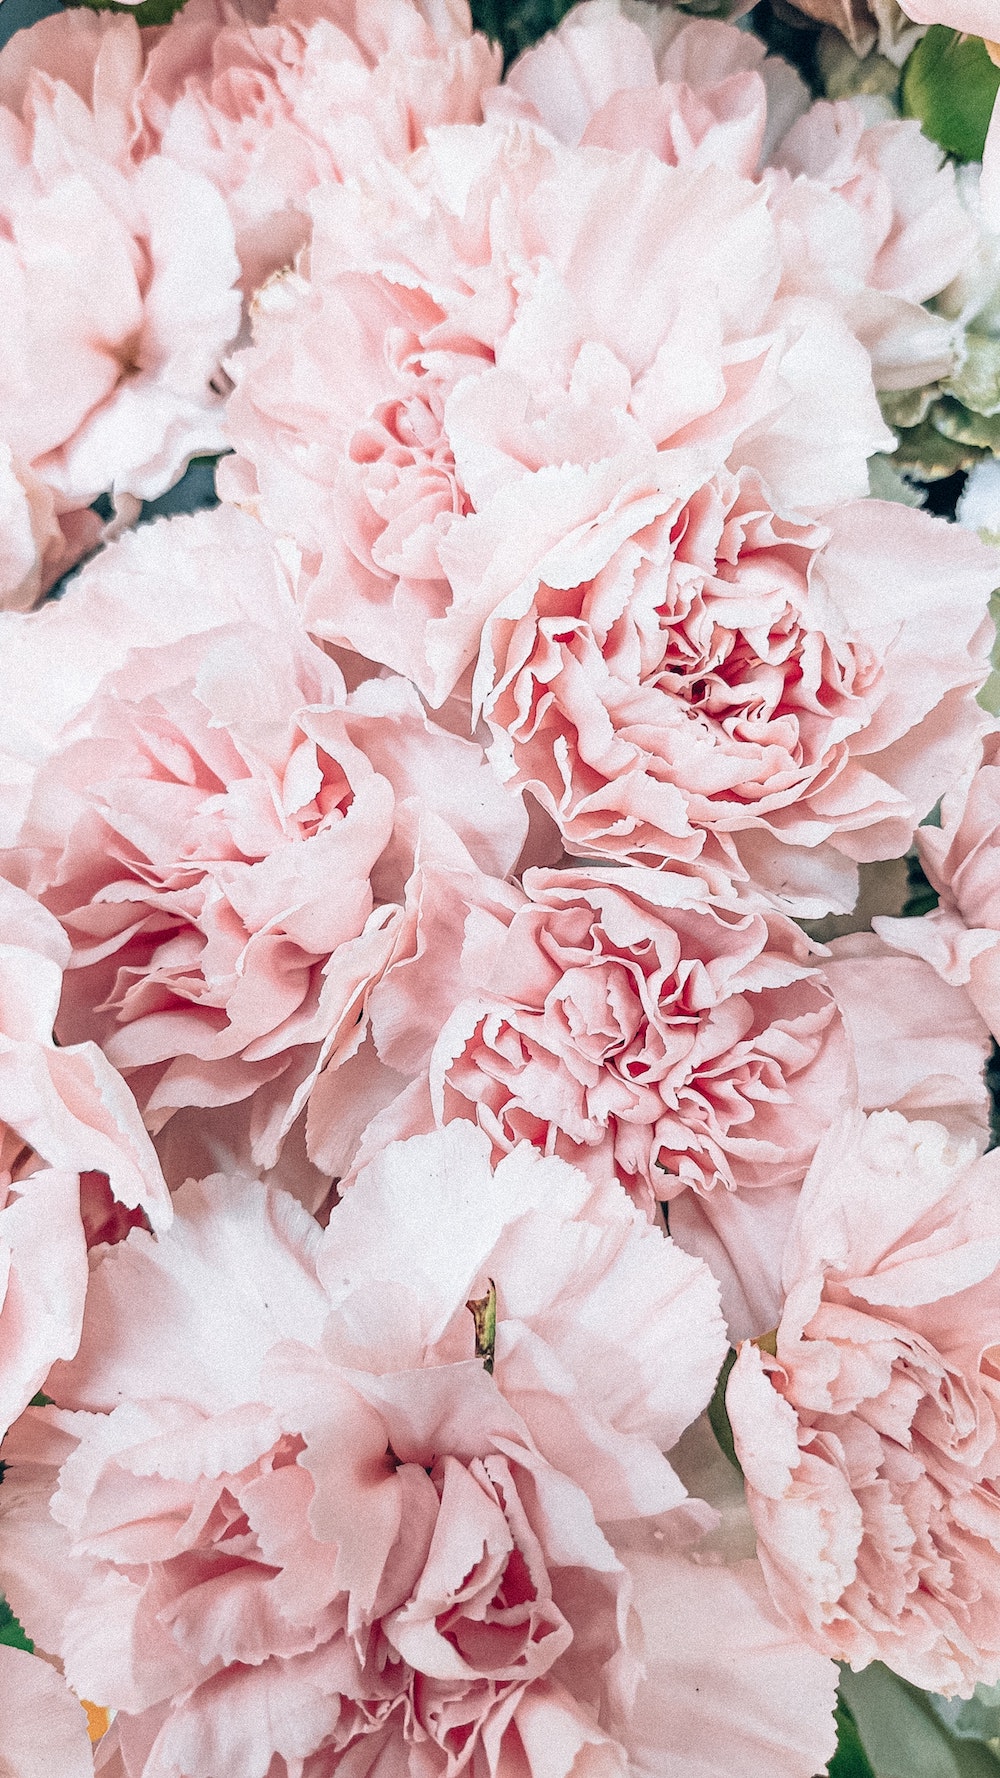 The meaning of peonies in Greek mythology